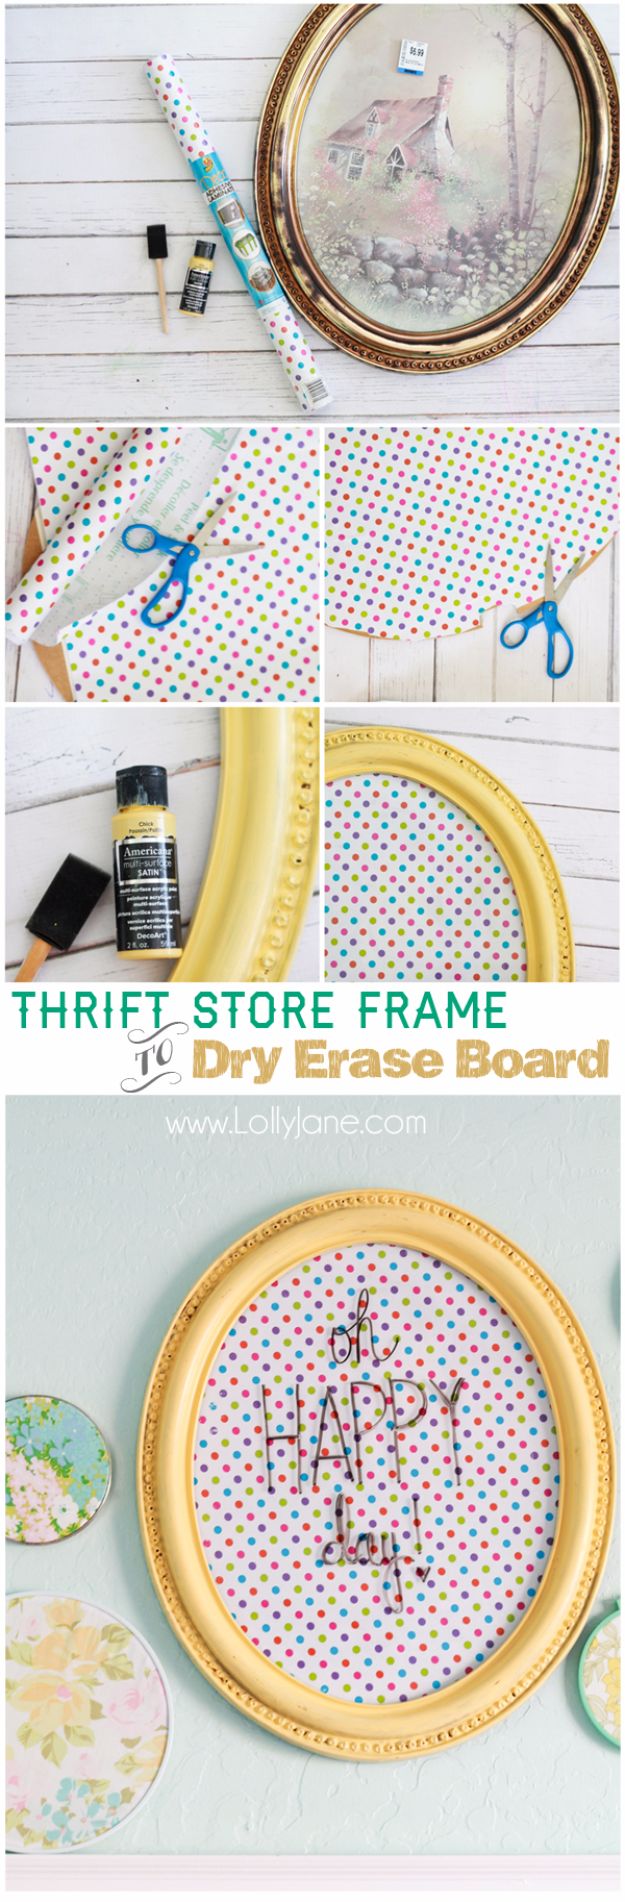 DIY Ideas With Old Picture Frames - Framed Polka Dot Dry Erase Board - Cool Crafts To Make With A Repurposed Picture Frame - Cheap Do It Yourself Gifts and Home Decor on A Budget - Fun Ideas for Decorating Your House and Room 